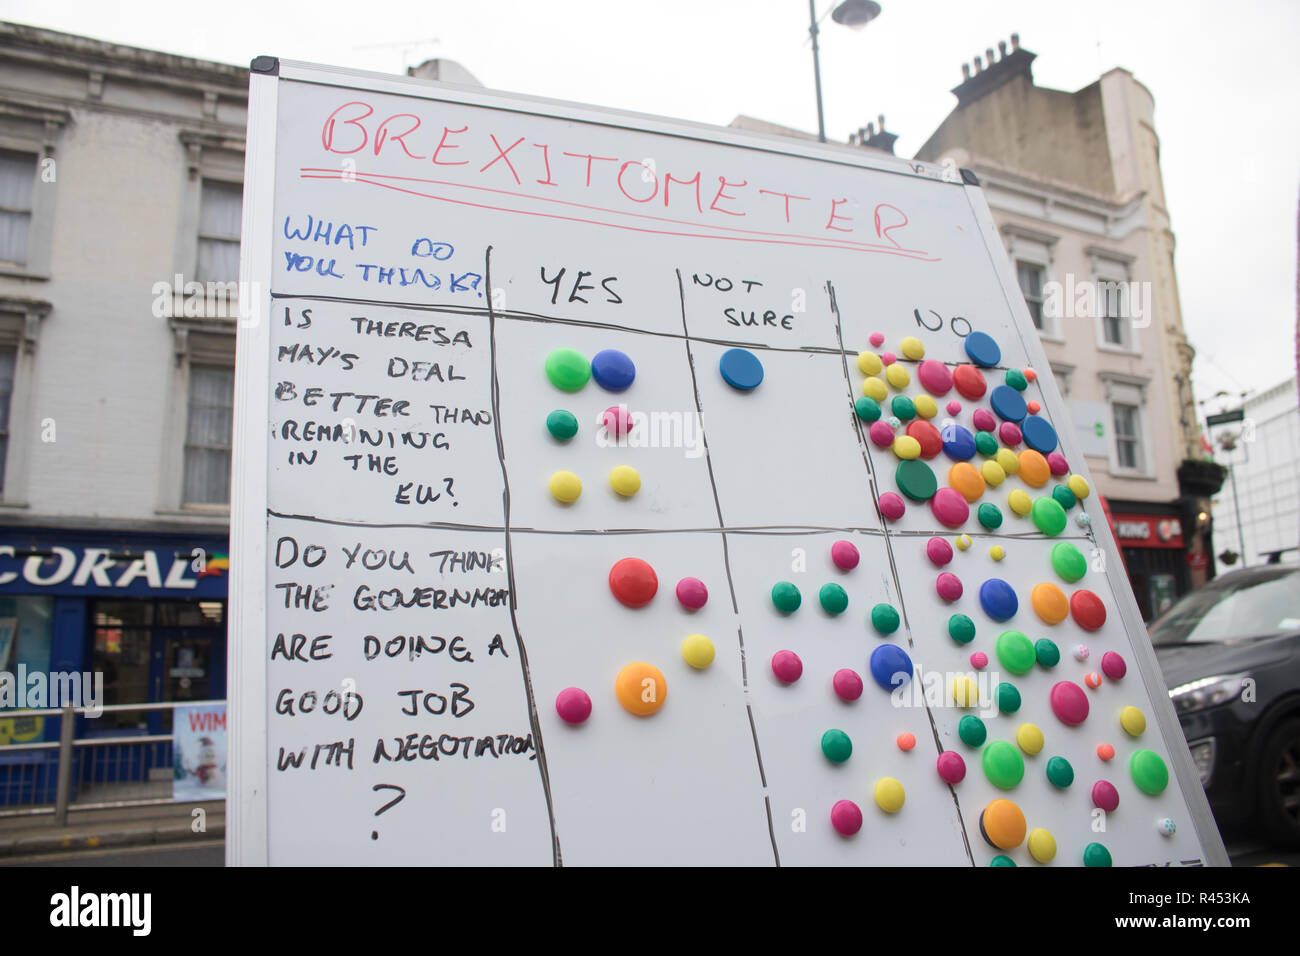 Wimbledon London ,UK 25th November 2018. Members of the public are invited to give their response on a Brexitometer  board sponsored by the Liberal Democrat party in Wimbledon Town Centre regarding Prime Minister Theresa May's Brexit deal and whether to have a People's Vote and second referendum. PM Theresa May has written directly to appeal to the British public to  try and sell her Brexit Withdrawal Agreement which was endorsed by the 27 members of the European Union in Brussels today Credit: amer ghazzal/Alamy Live News Stock Photo